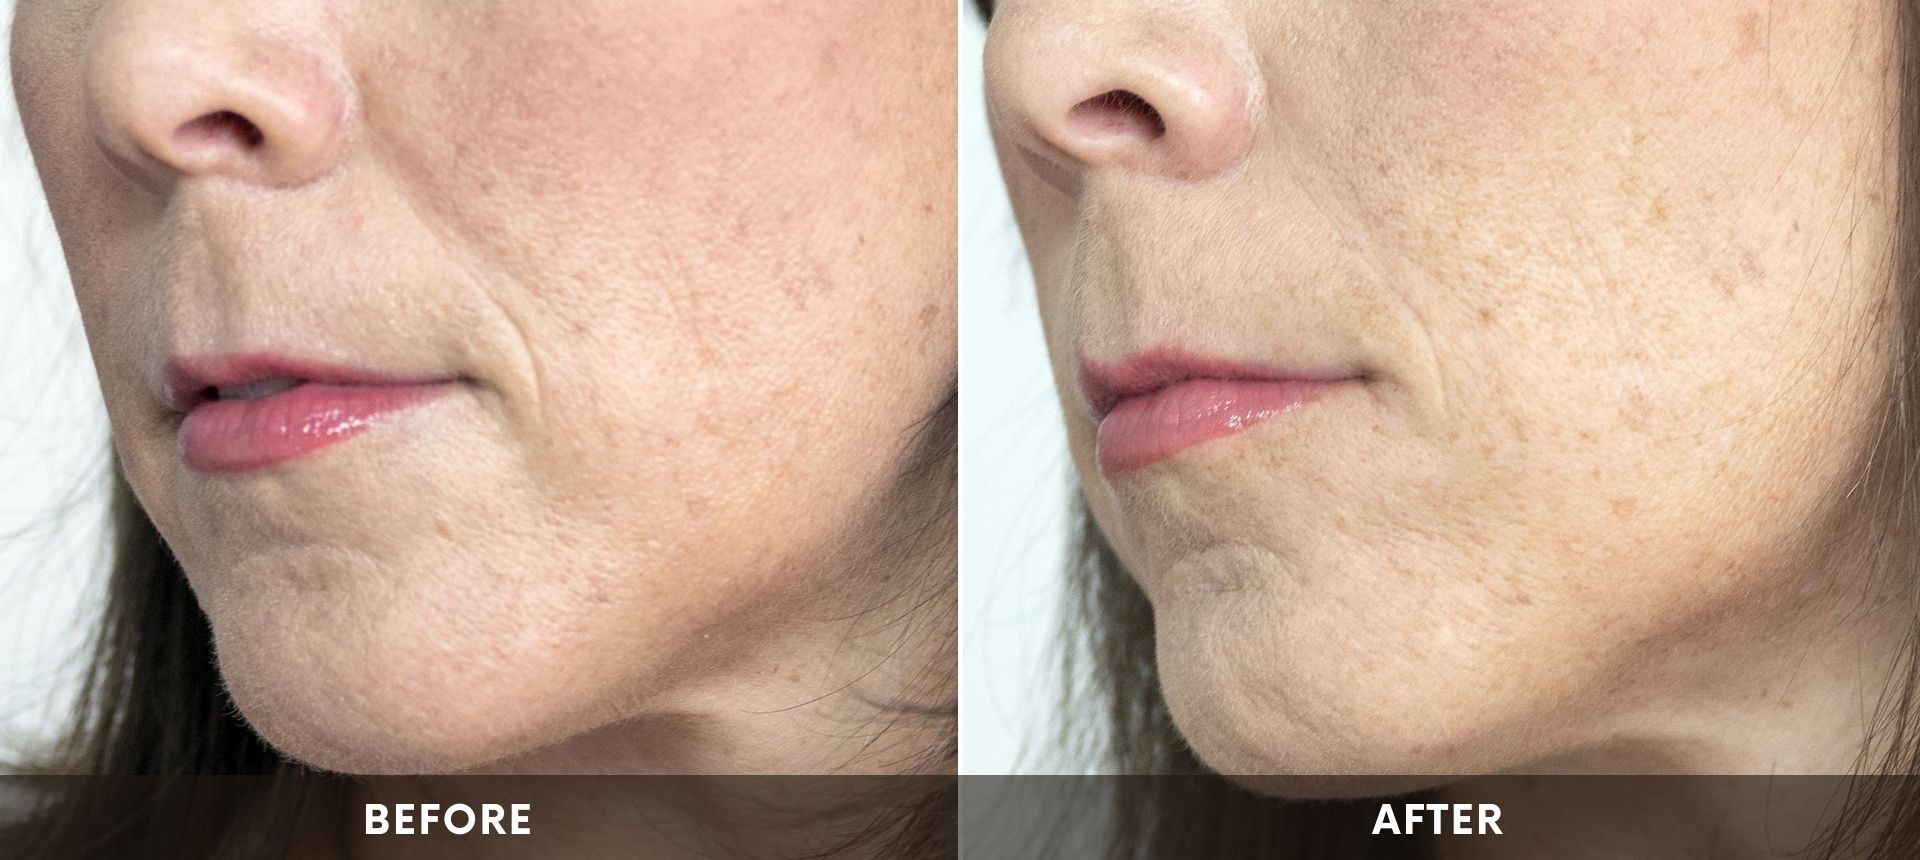 Womans face before and after Revanesse® Versa™ treatment at ABM Wellness in Goldsboro, NC.